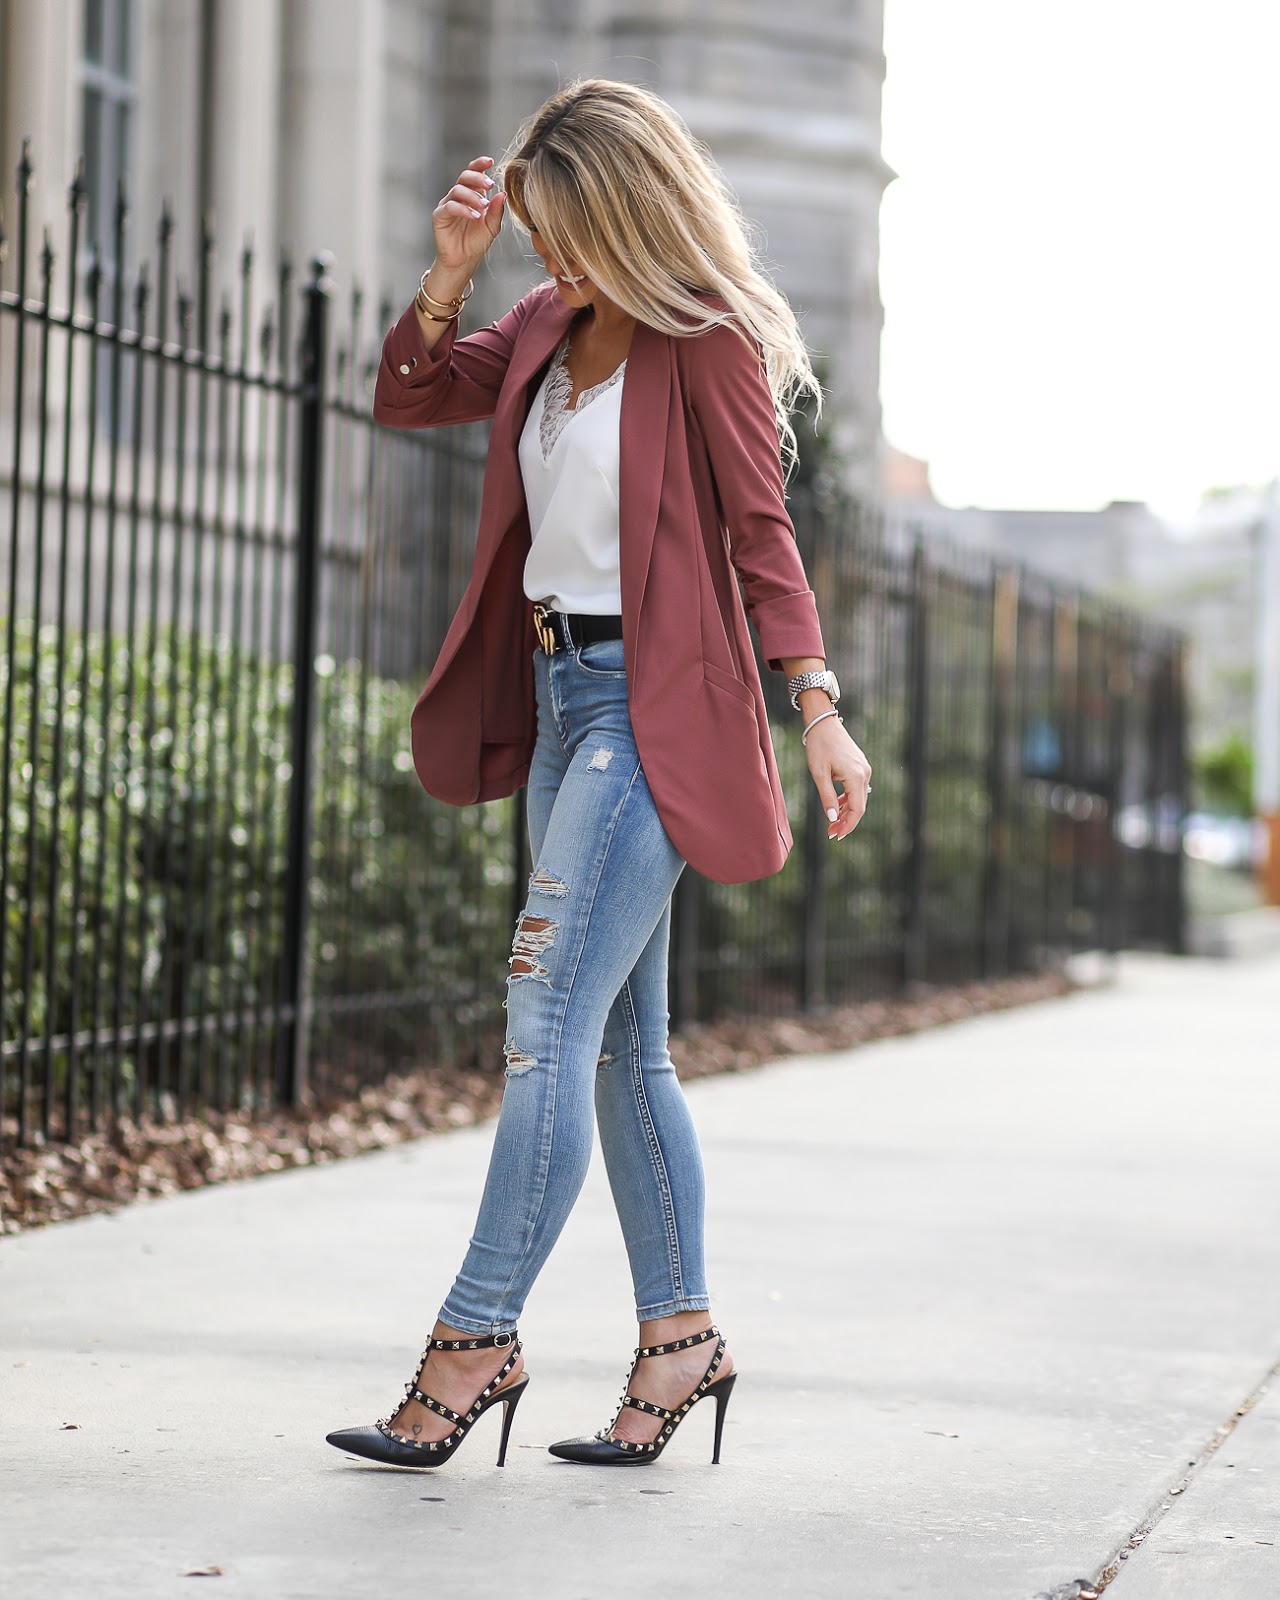 CASUAL CHIC SPRING STYLE - Laura Beverlin